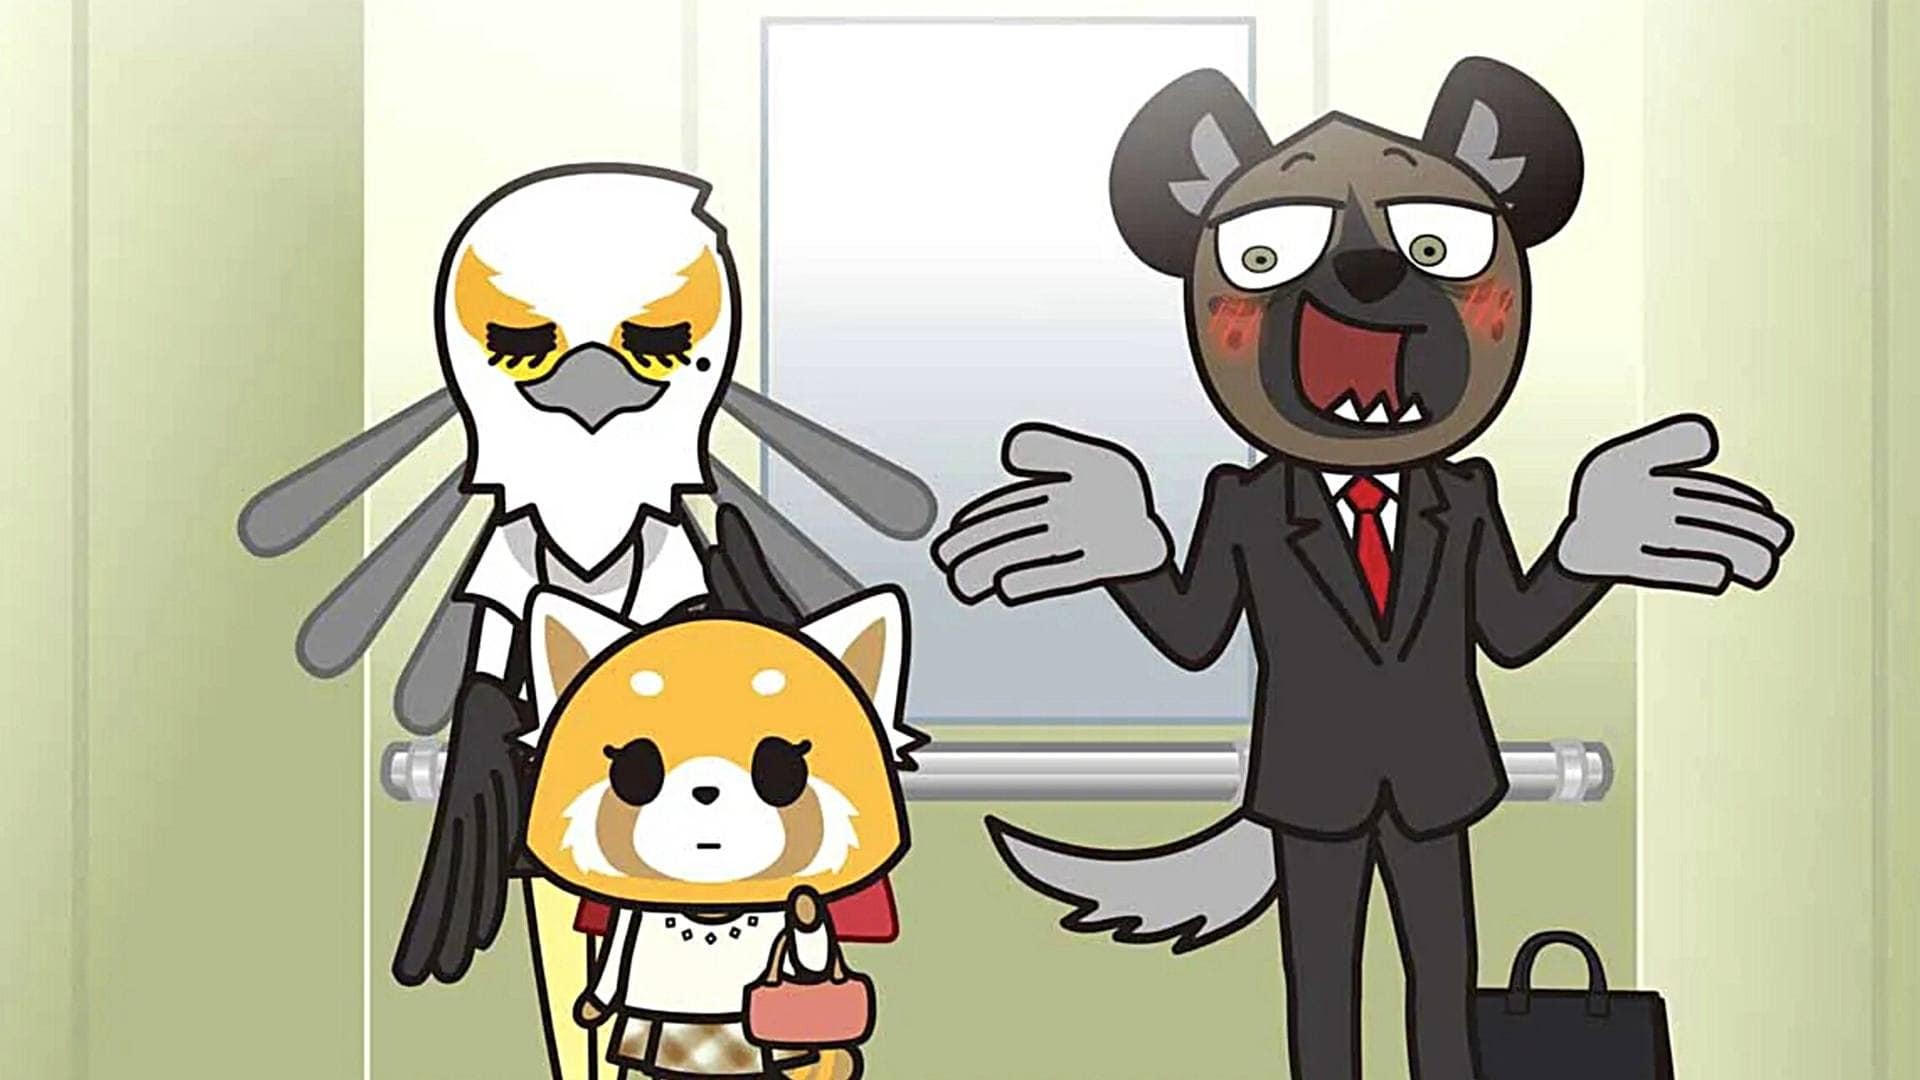 Aggretsuko Season 4 Perfectly Sums Up Toxic Work Culture Gayming Magazine